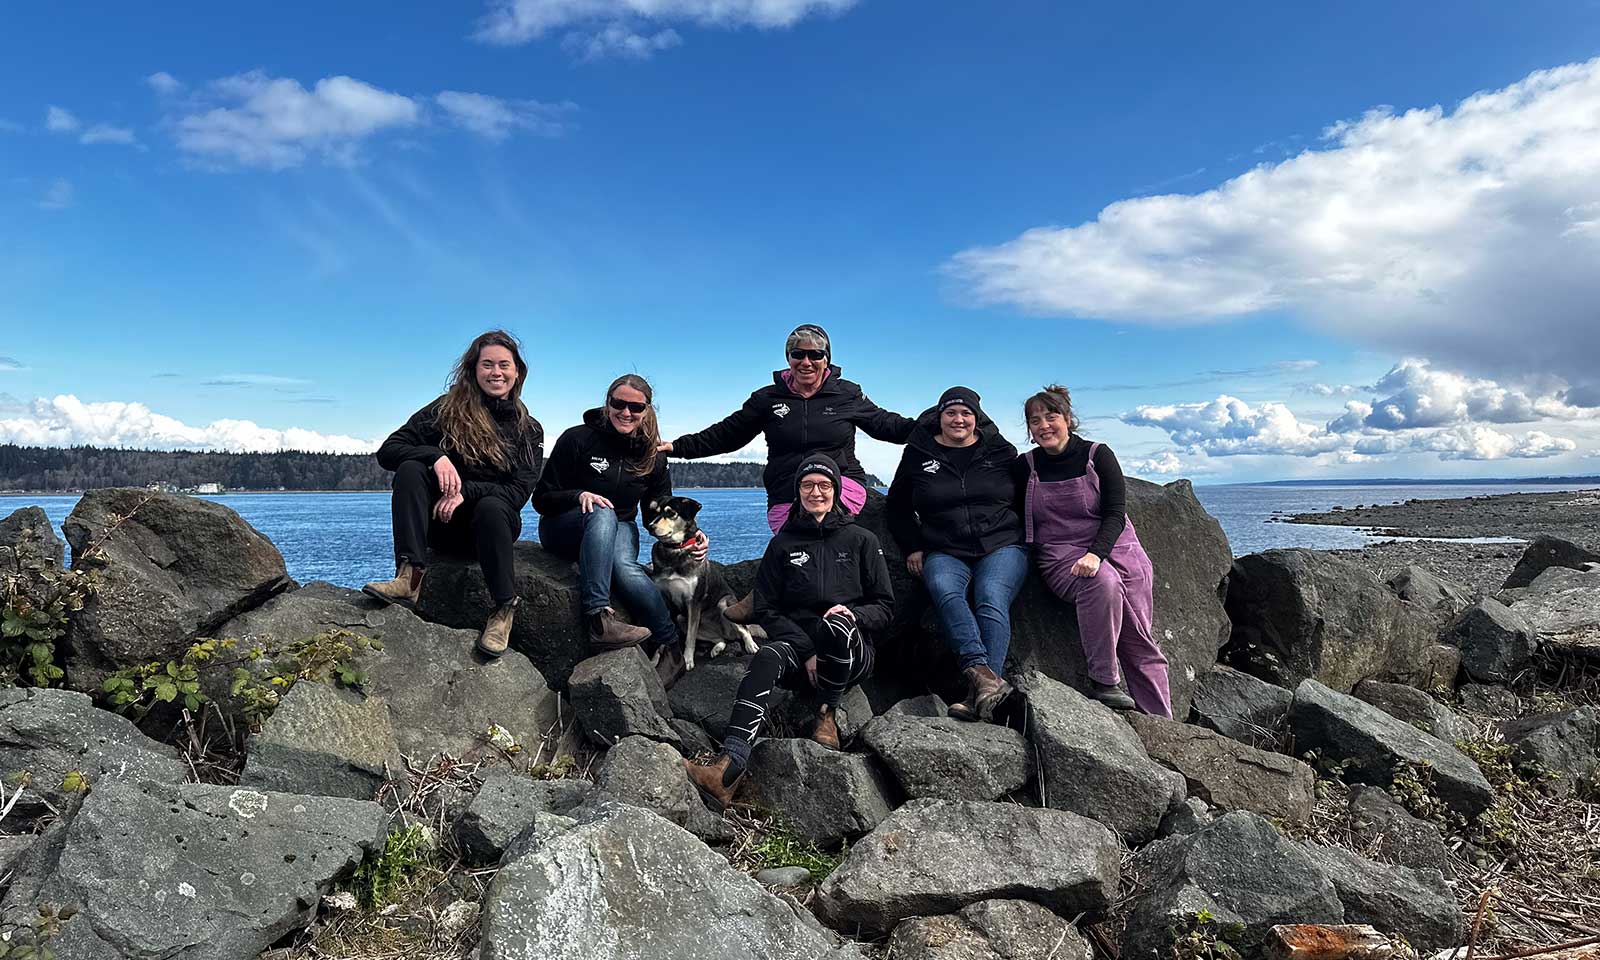 mers marine education research society team sitting on rocks with water and sky in background